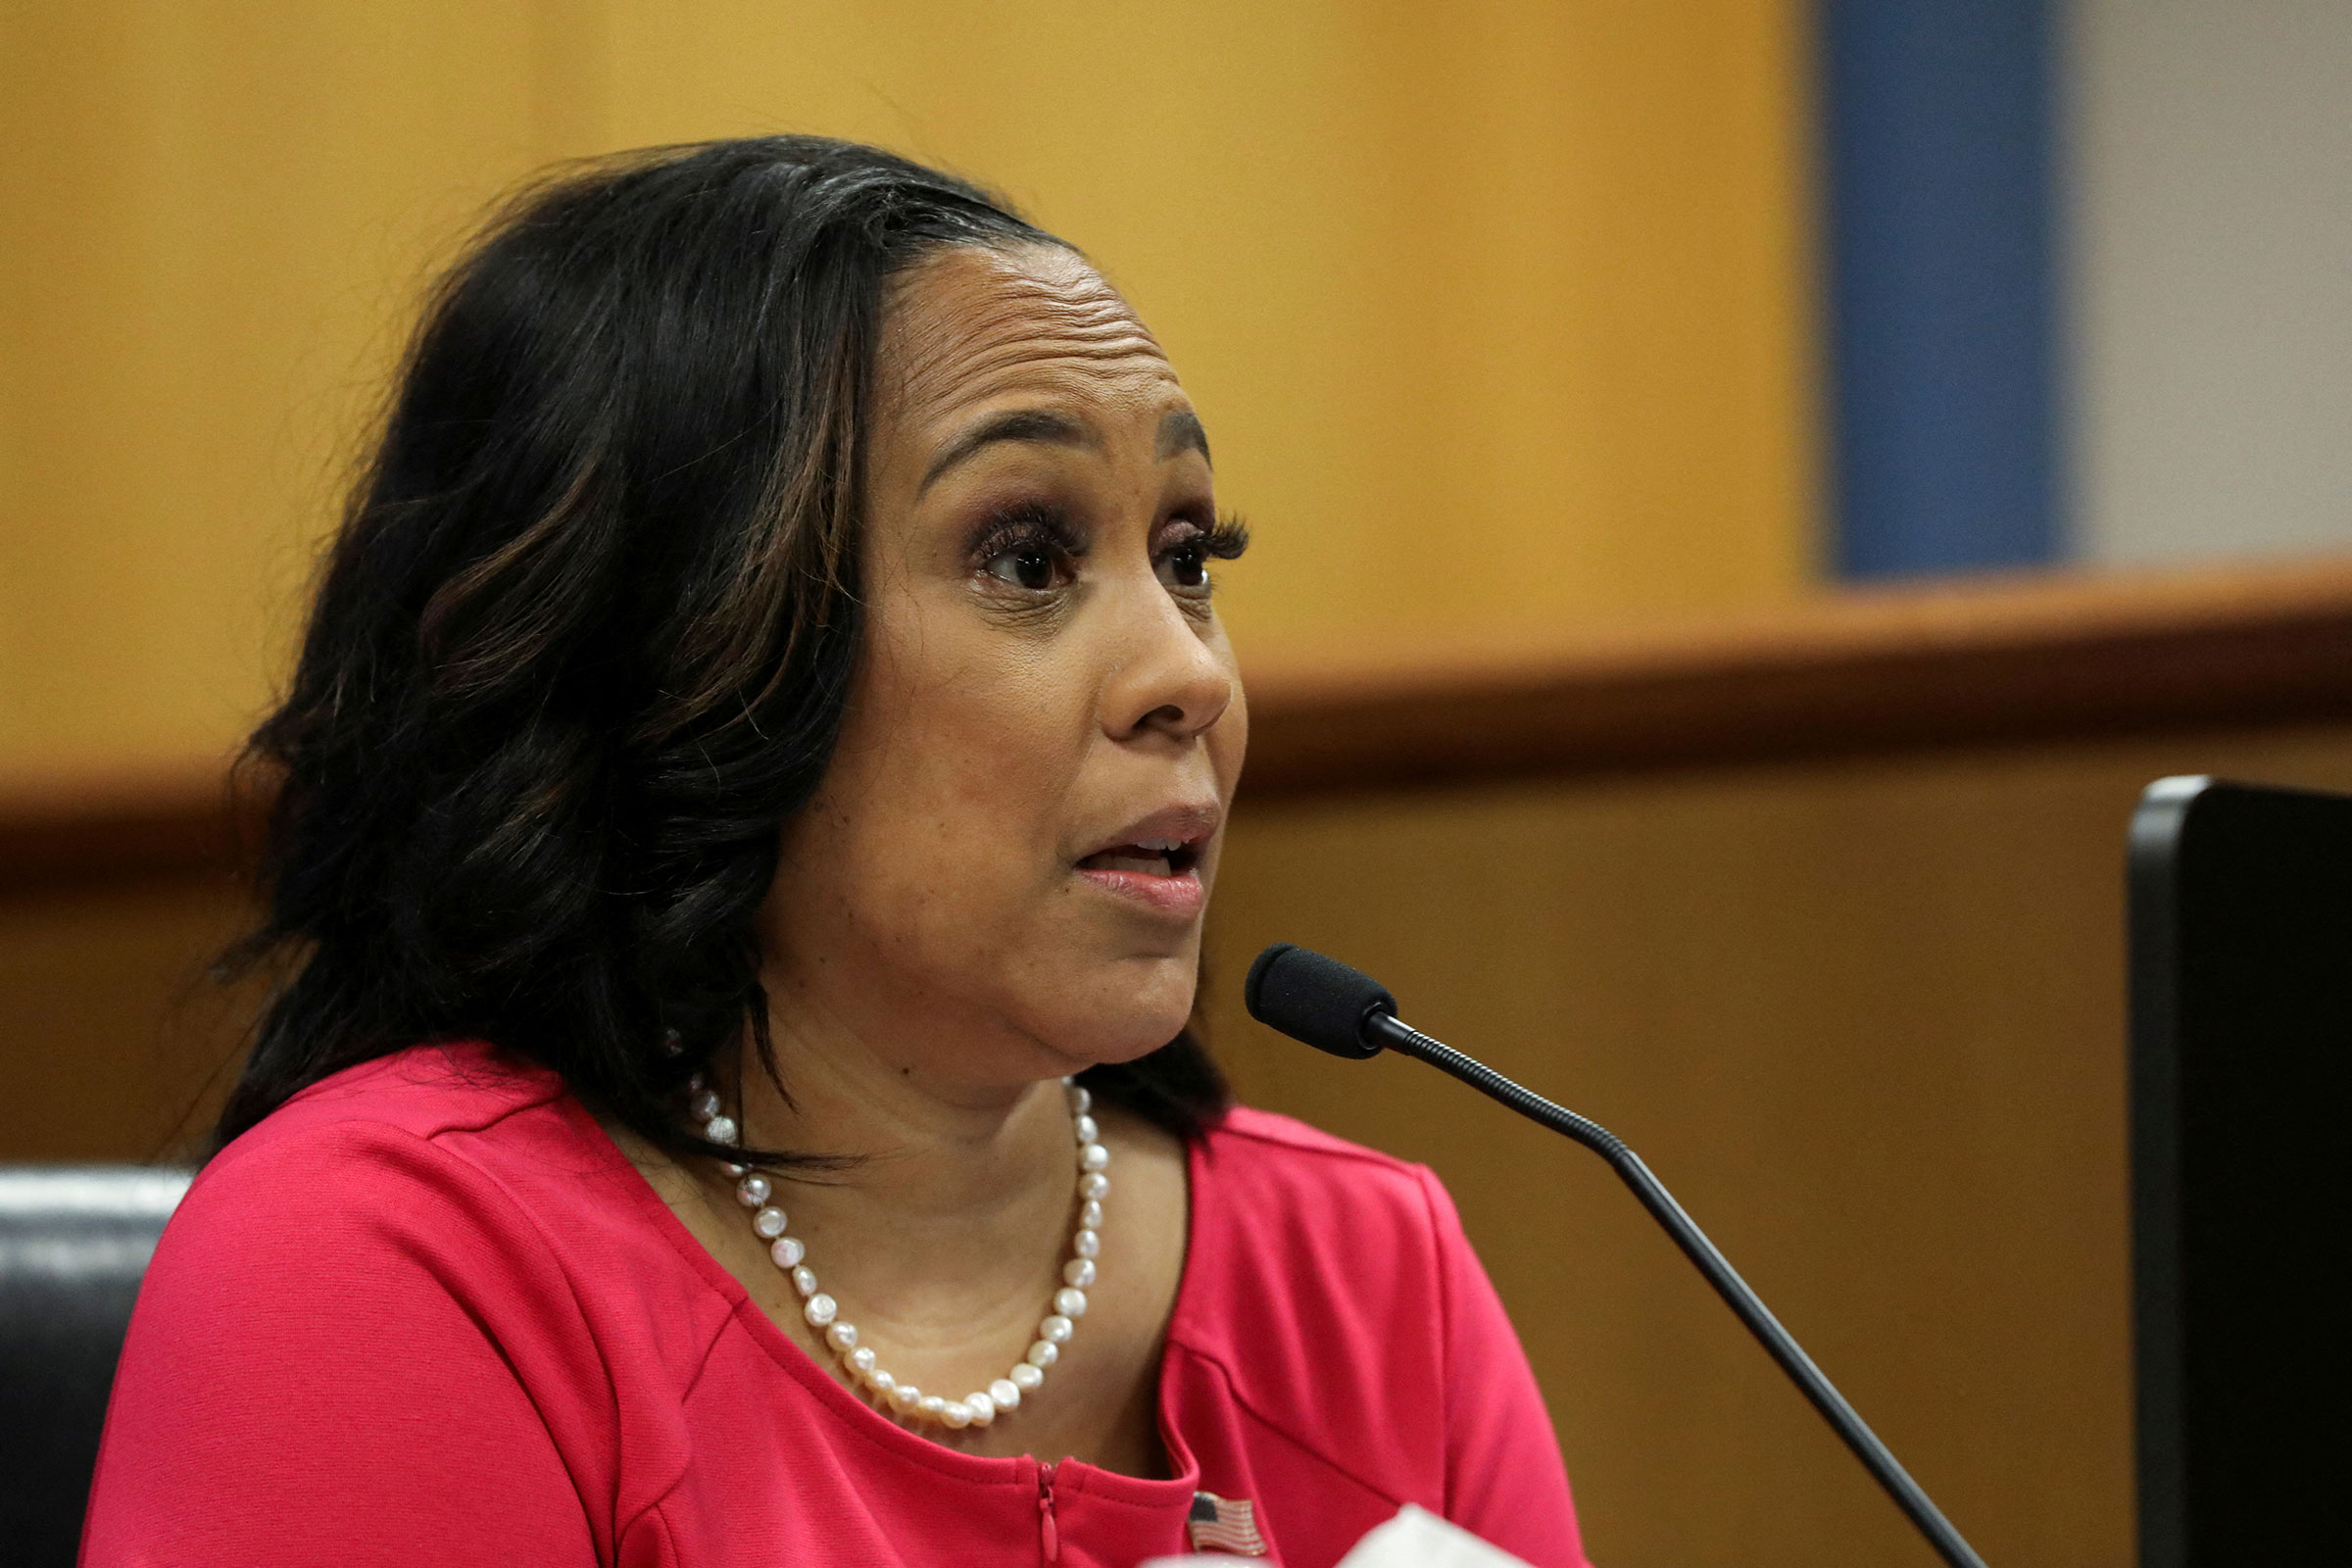 Attorney Fani Willis speaks during a hearing in the case of State of Georgia v. Donald John Trump at the Fulton County Courthouse in Atlanta on February 15.